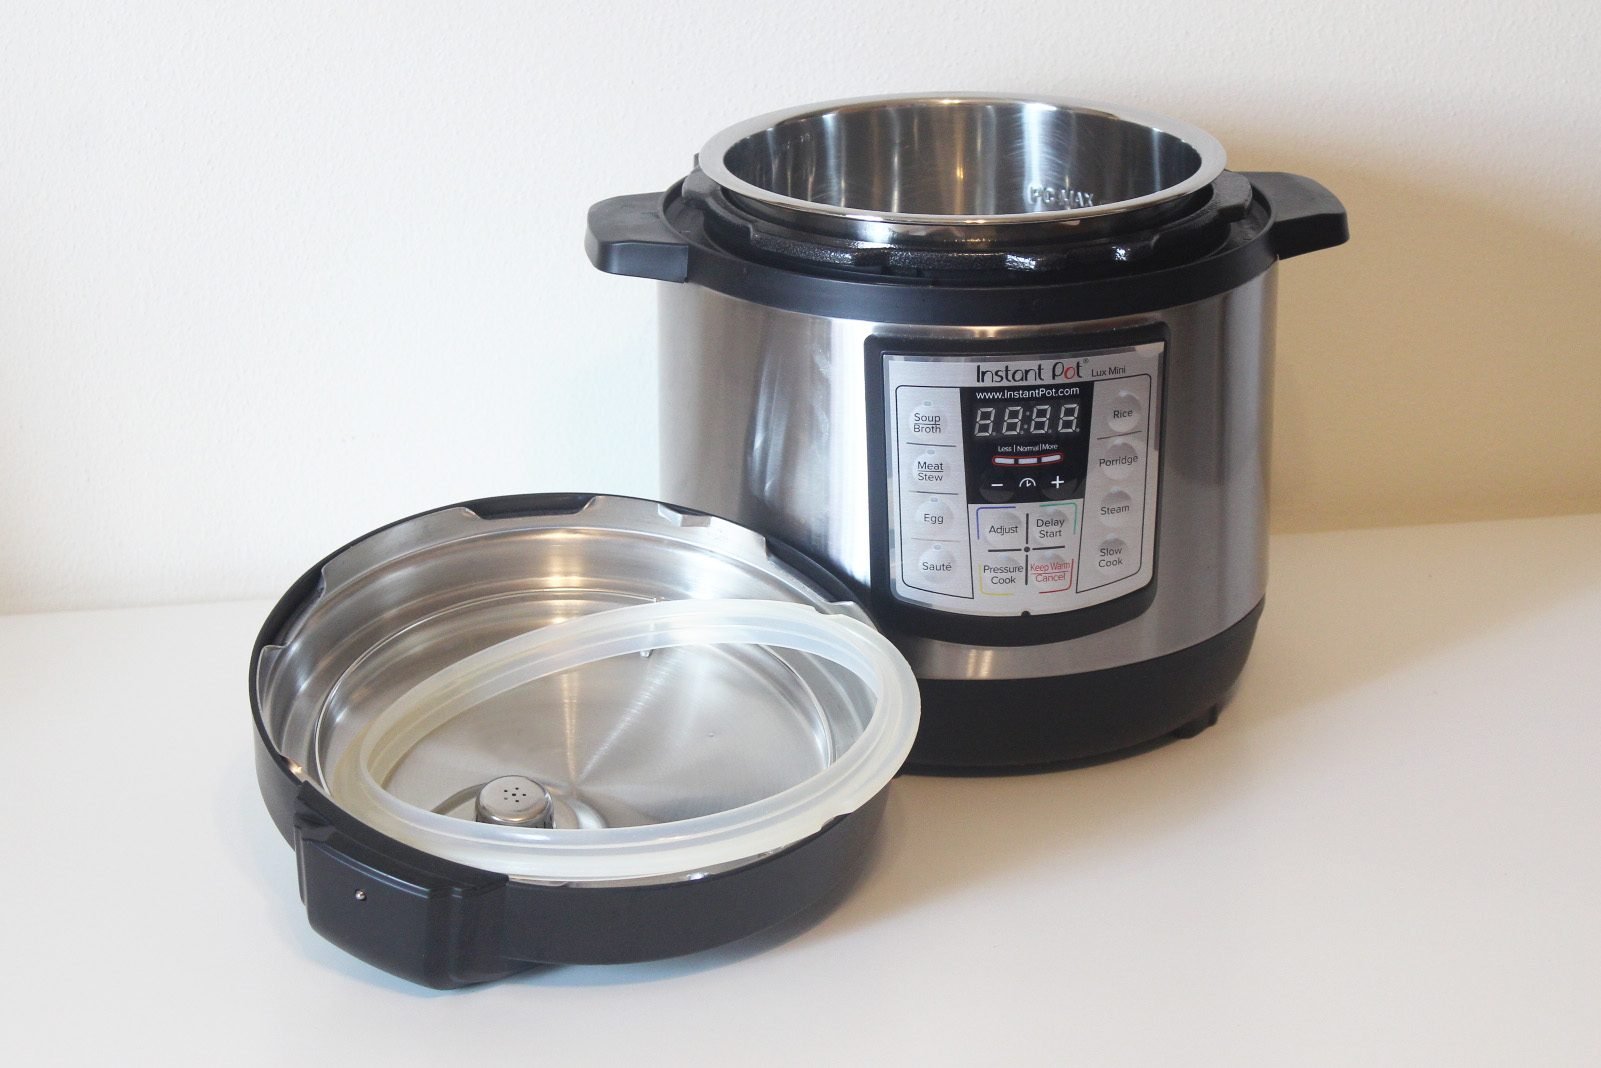 Silicone Sealing Ring Set for Instant Pots